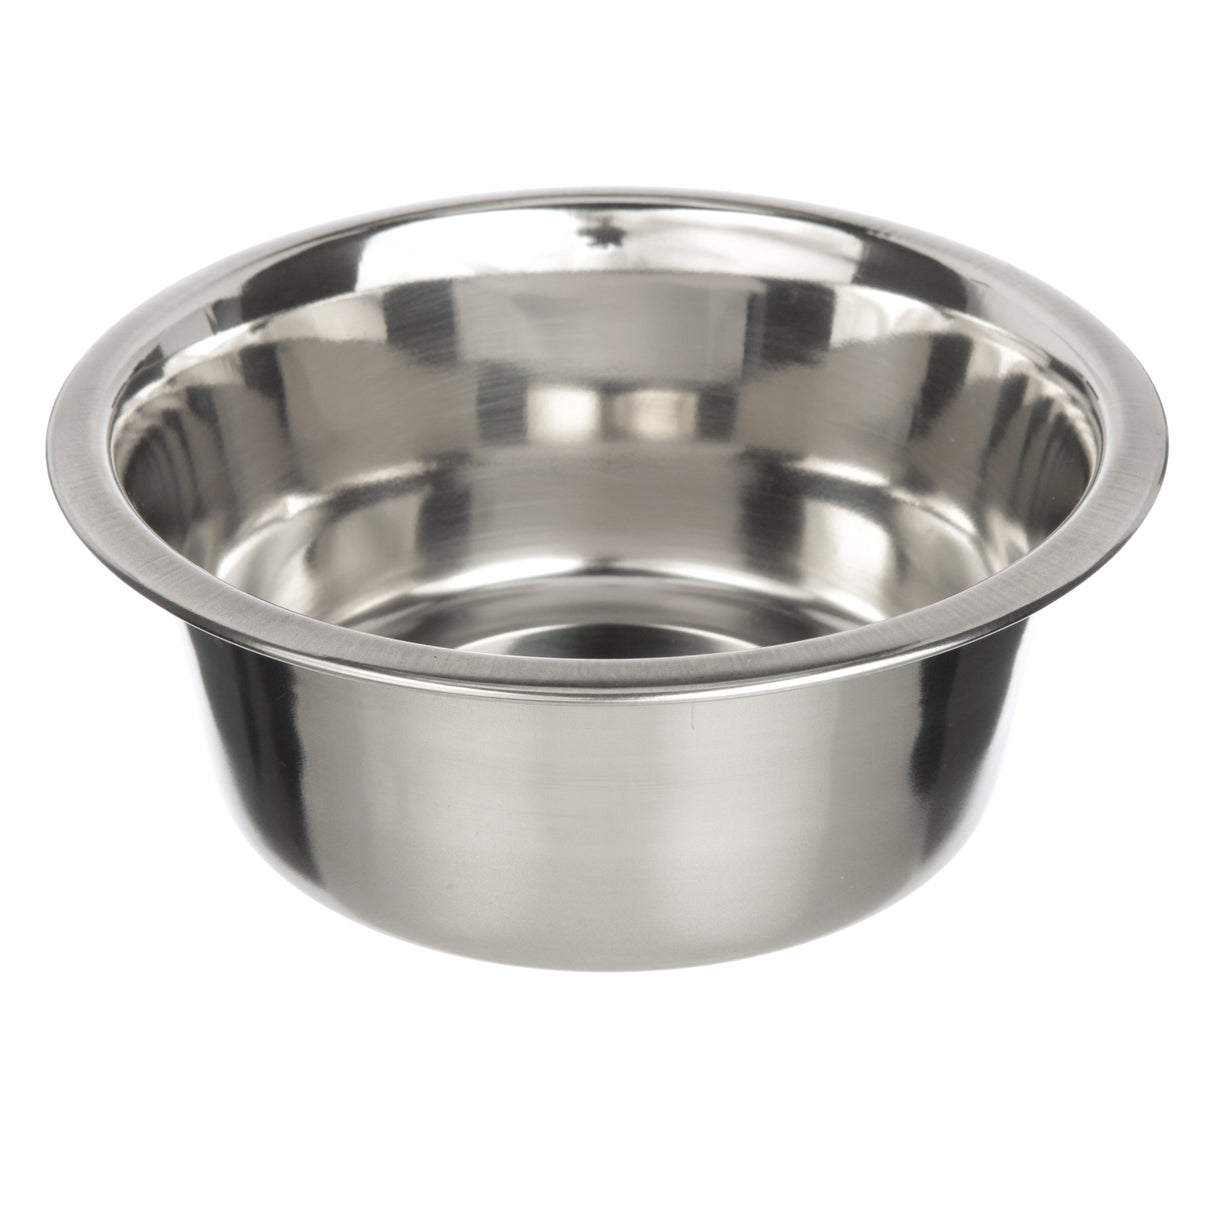 Stainless Steel Bowl top view